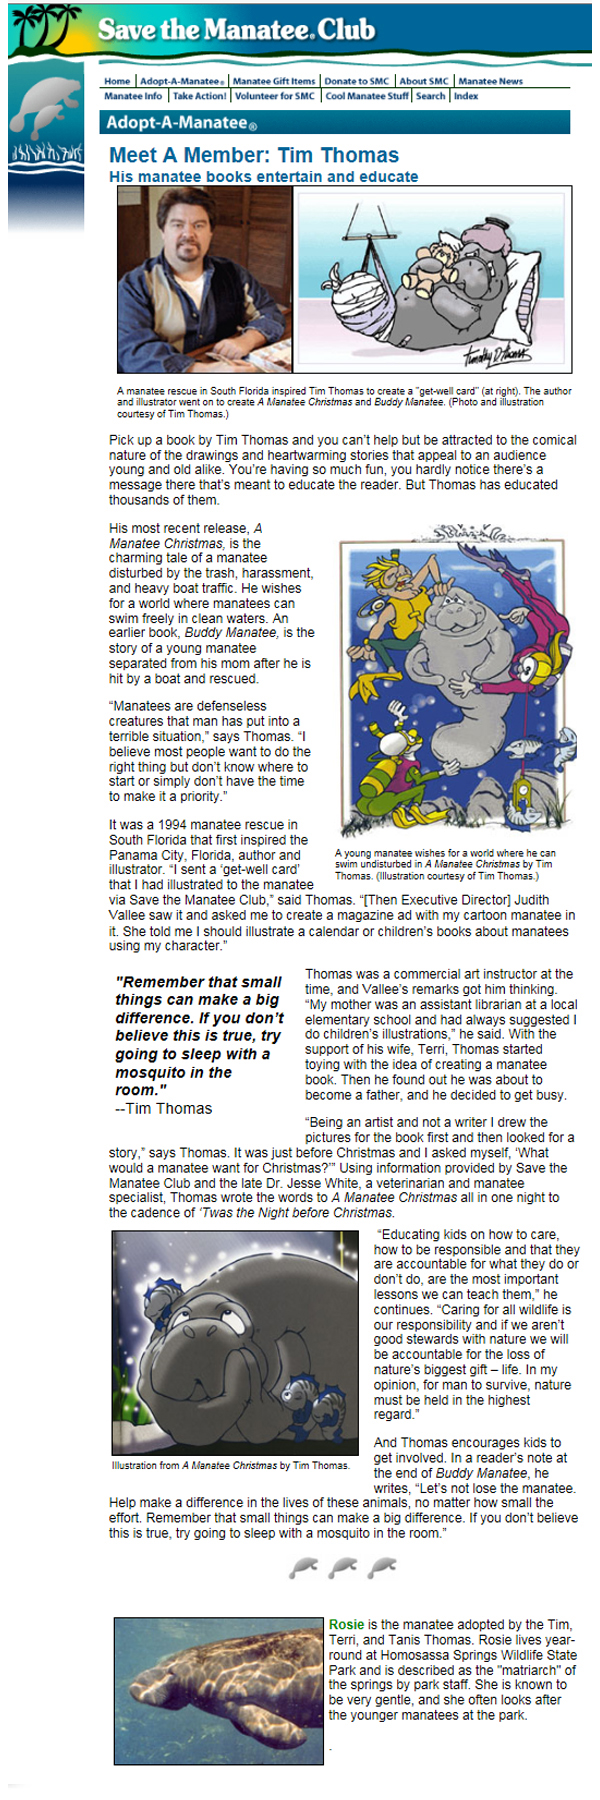 Save the MANATEE Article